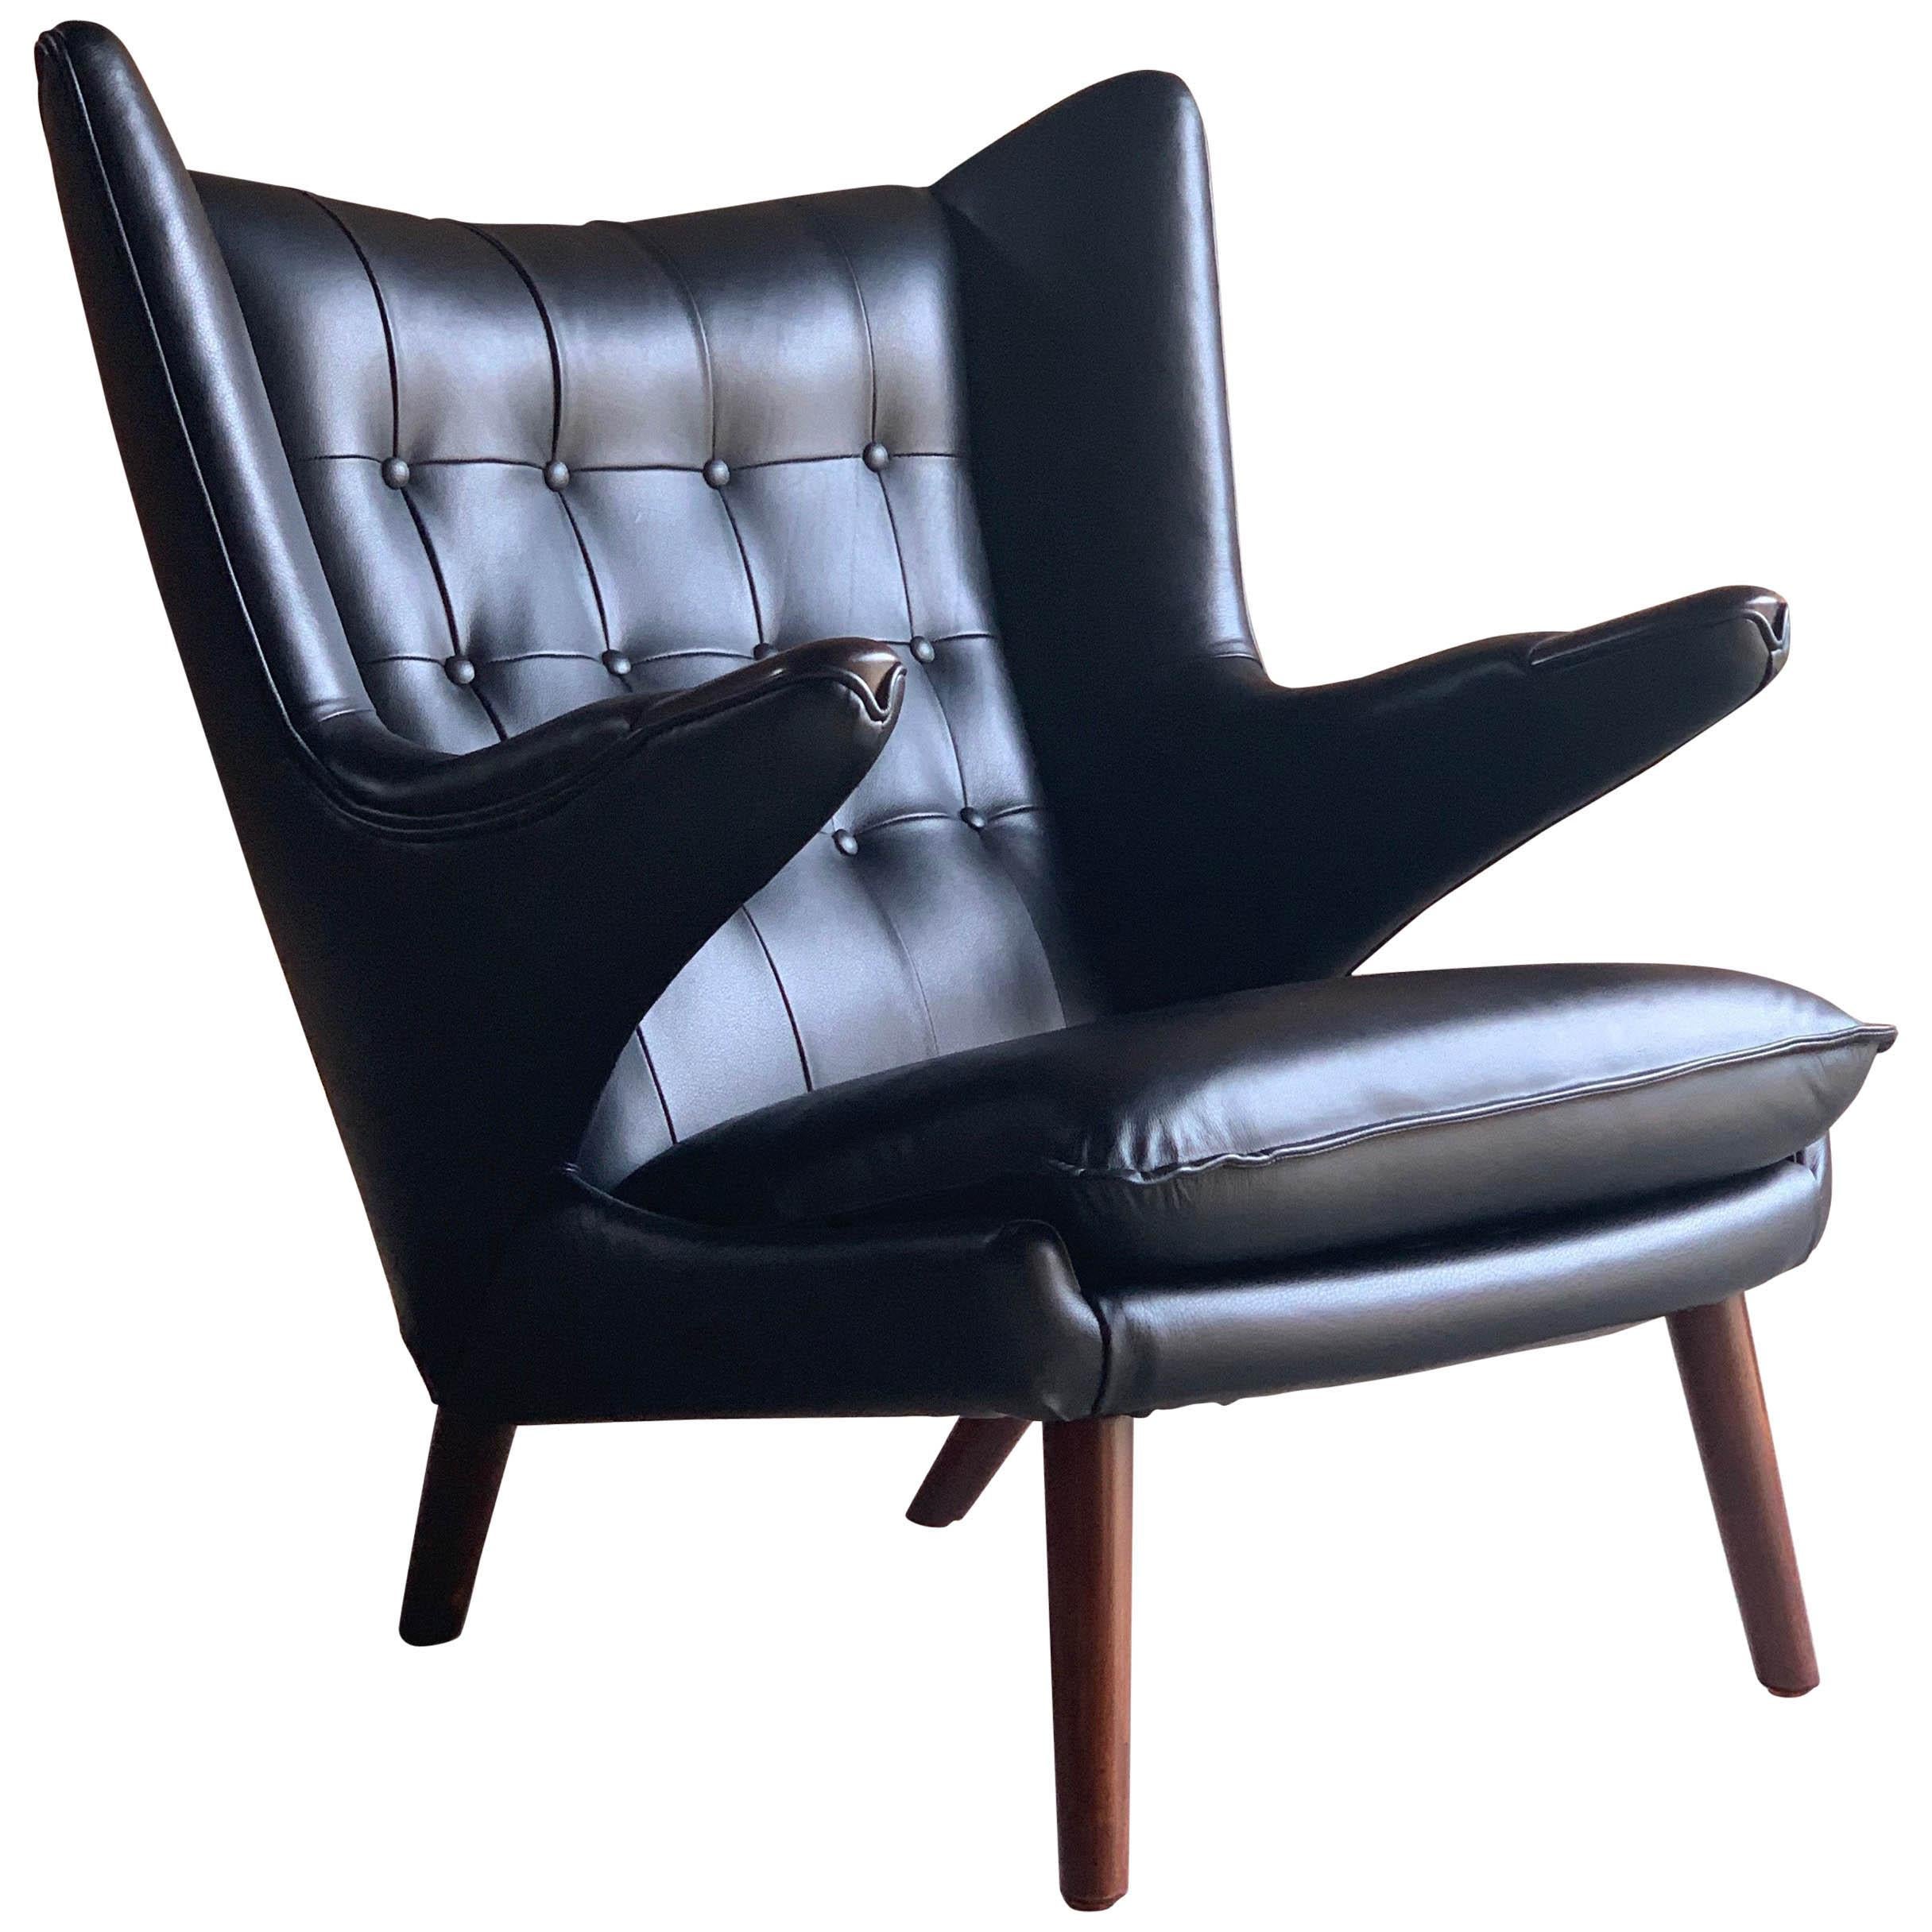 Hans Wegner Papa Bear lounge chair black leather Model AP19 Denmark 1963

Hans J Wegner black leather 'Papa Bear' chair Model AP19 Denmark 1963, otherwise known as a 'Bamsestol', designed in 1951, this example dates to early 1960s, the chair has